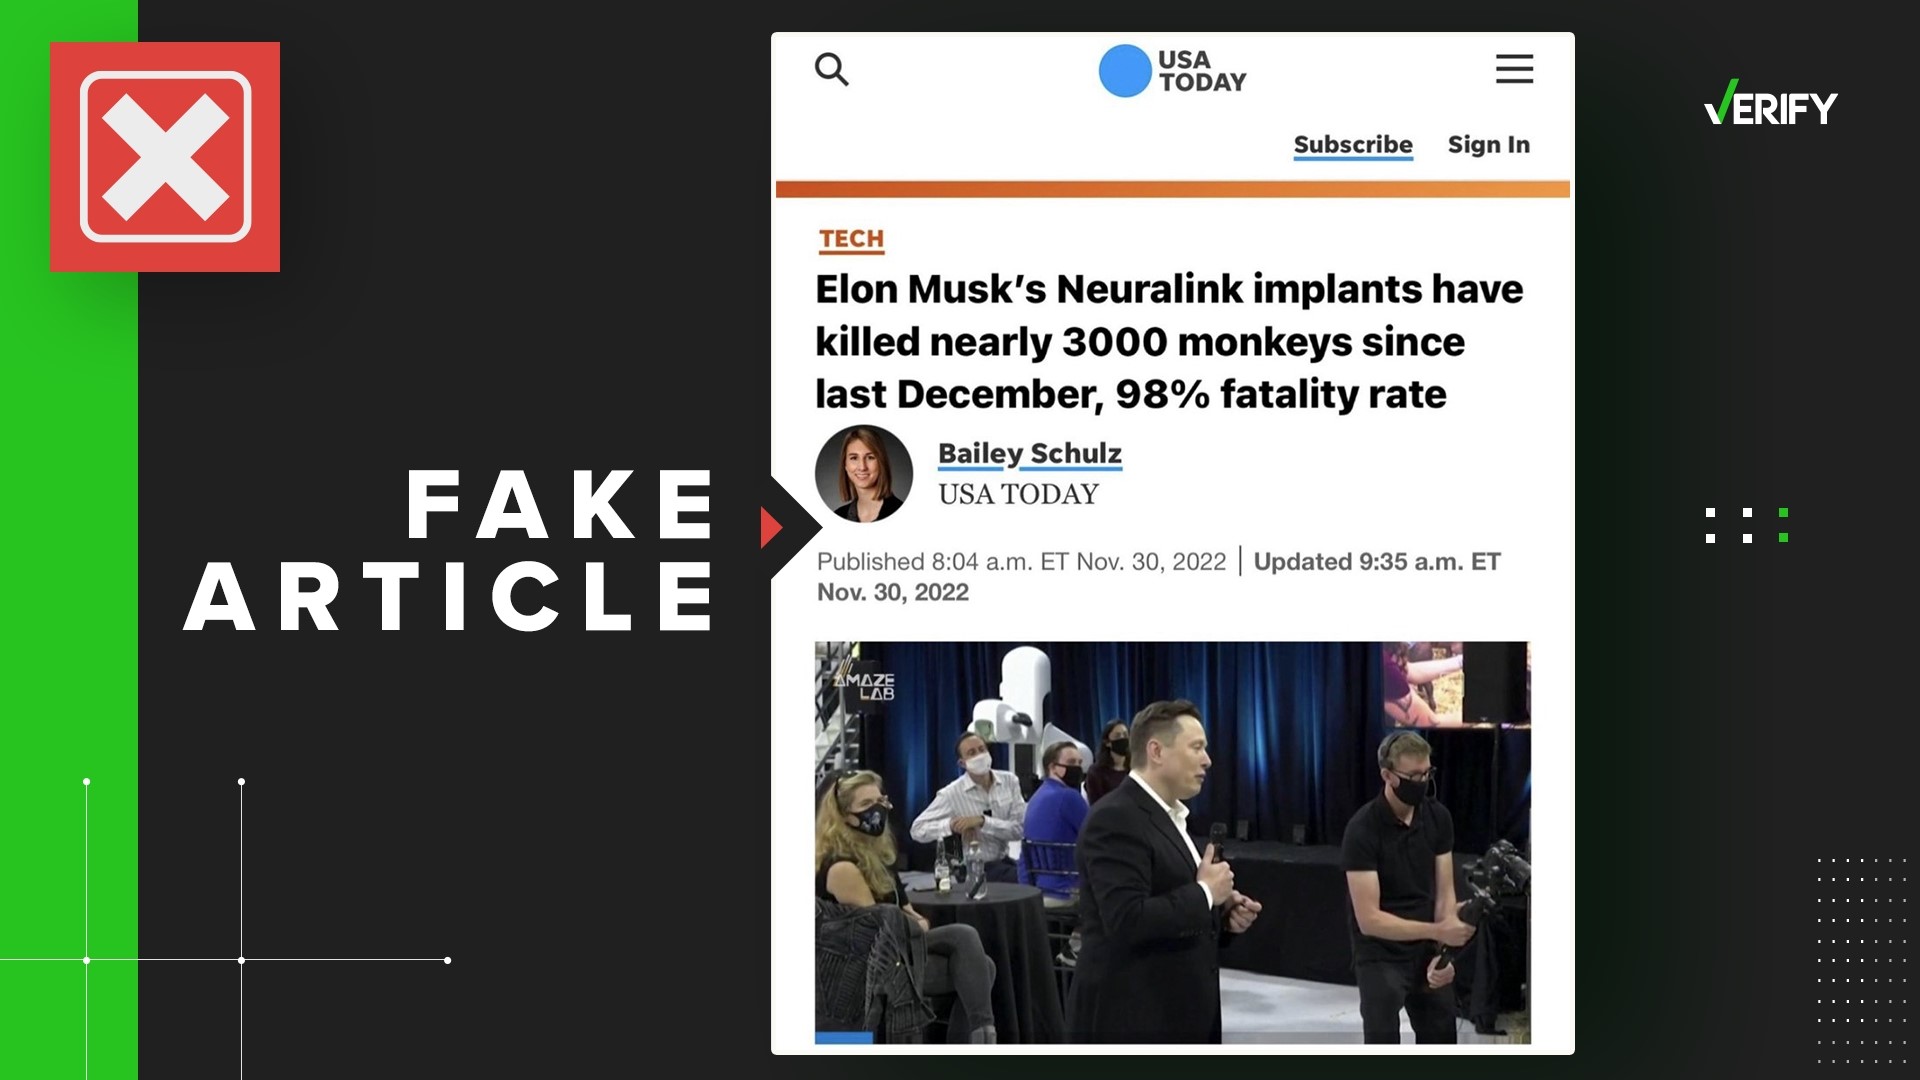 Elon Musk’s company Neuralink has admitted it’s killed some animal test subjects, but an image of an article saying it killed 3,000 monkeys is fake.